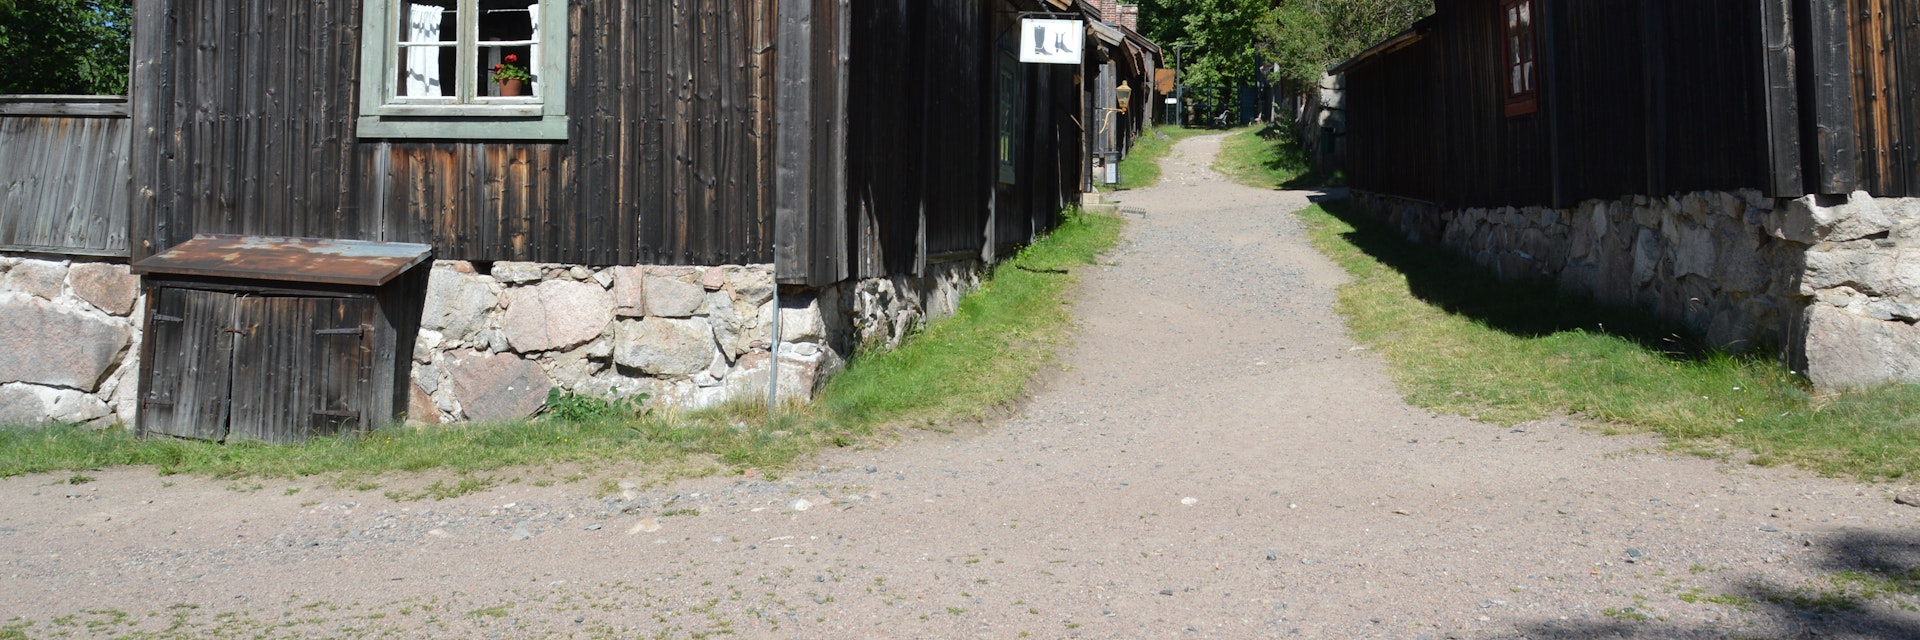 Old homes and artisan quarters in Luostarinmaki open air museum, Turku, Finland.